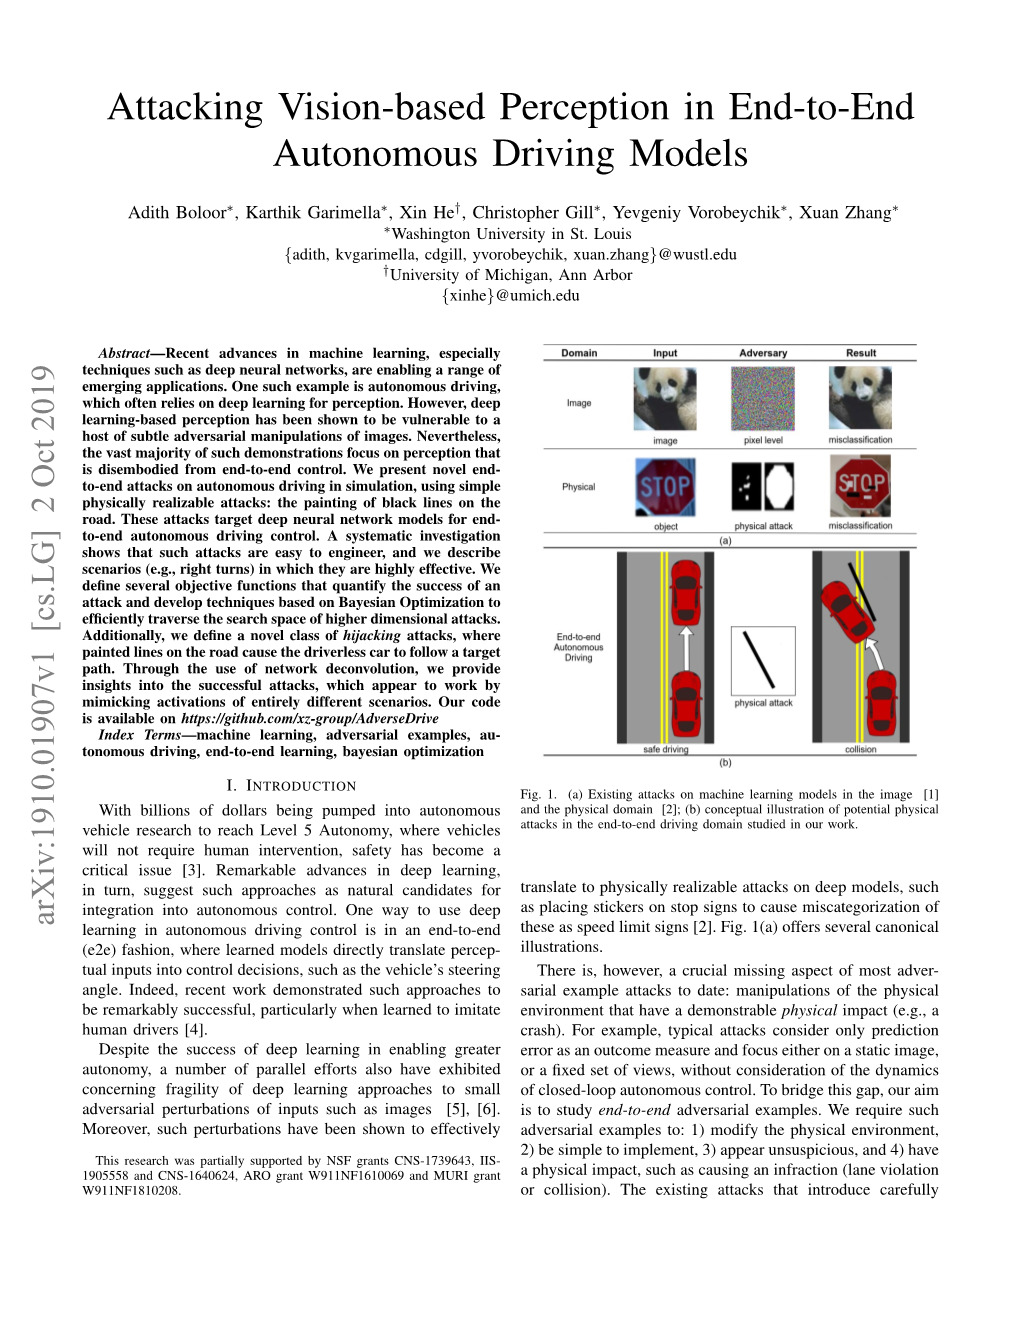 Attacking Vision-Based Perception in End-To-End Autonomous Driving Models